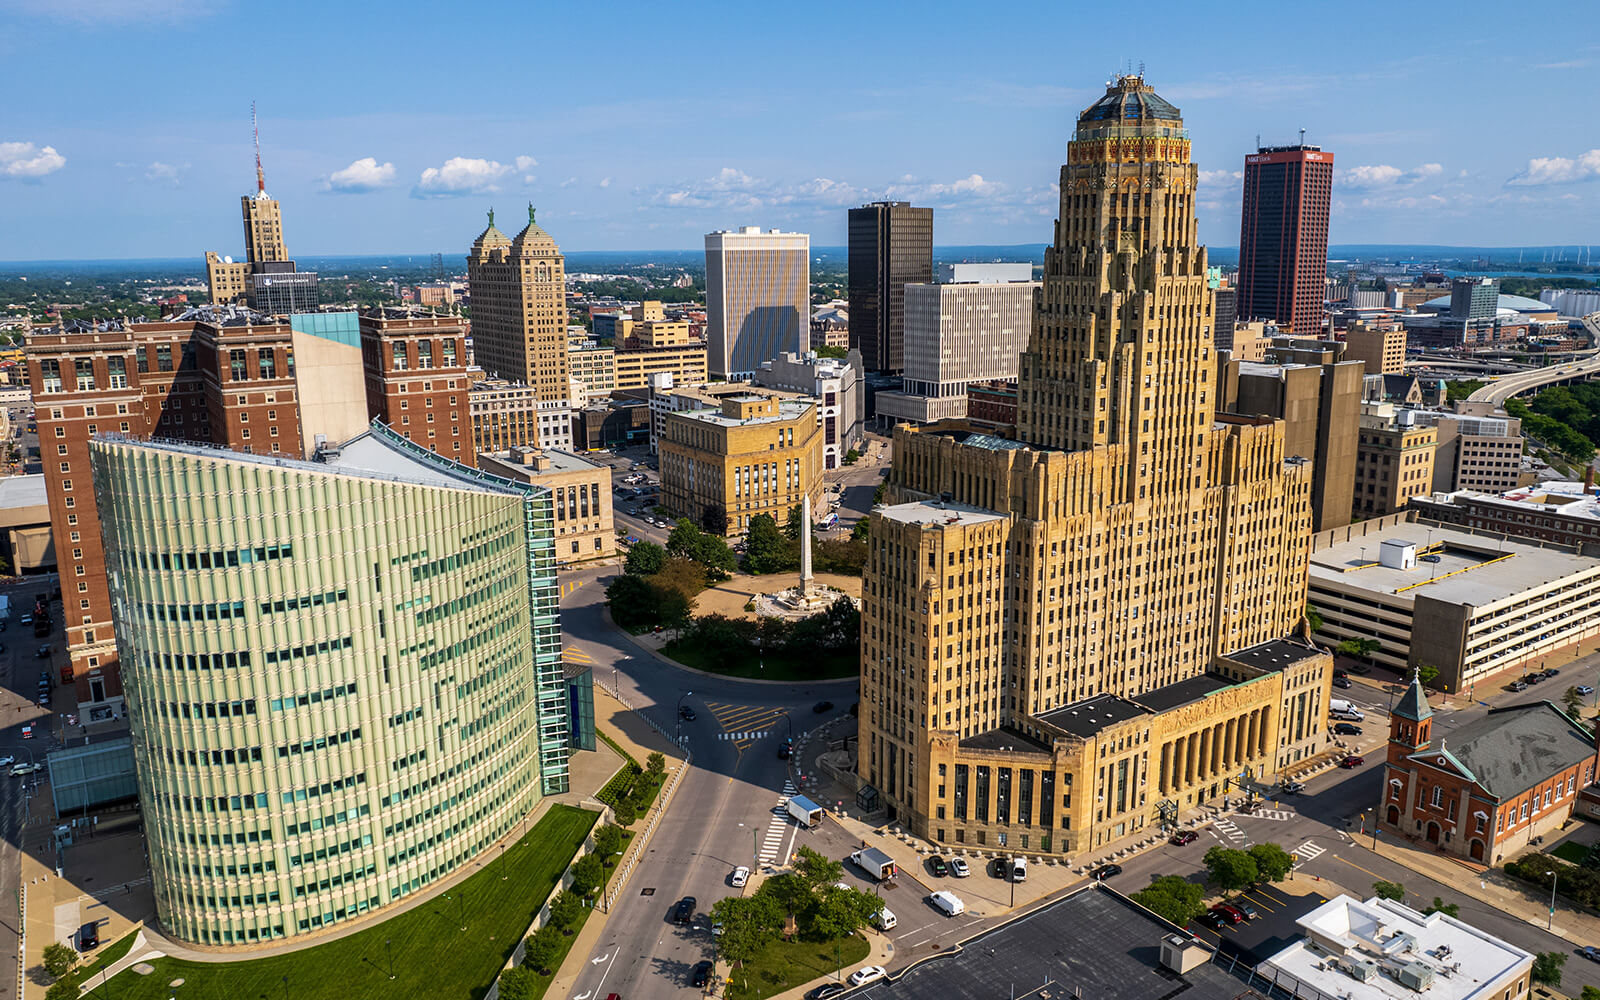 An aerial shot of downtown Buffalo with Buffalo City Hall in the center